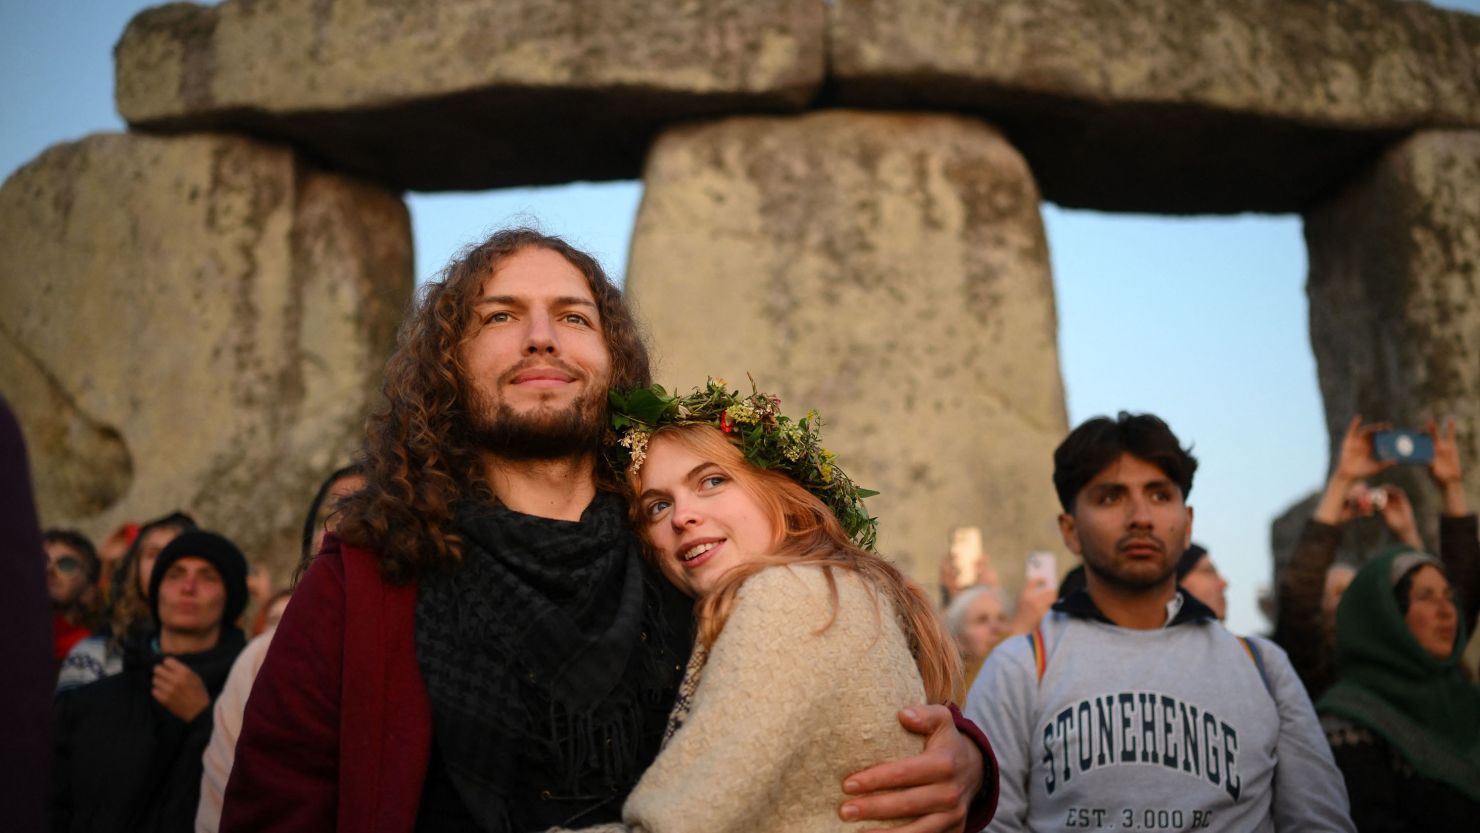 Revellers celebrate the Summer Solstice as the sun rises at Stonehenge, near Amesbury, in Wiltshire, southern England on June 21, 2023, in a festival, which dates back thousands of years, celebrating the longest day of the year when the sun is at its maximum elevation. The stone monument -- carved and constructed at a time when there were no metal tools -- symbolises Britain's semi-mythical pre-historic period, and has spawned countless legends. (Photo by Daniel LEAL / AFP) (Photo by DANIEL LEAL/AFP via Getty Images)